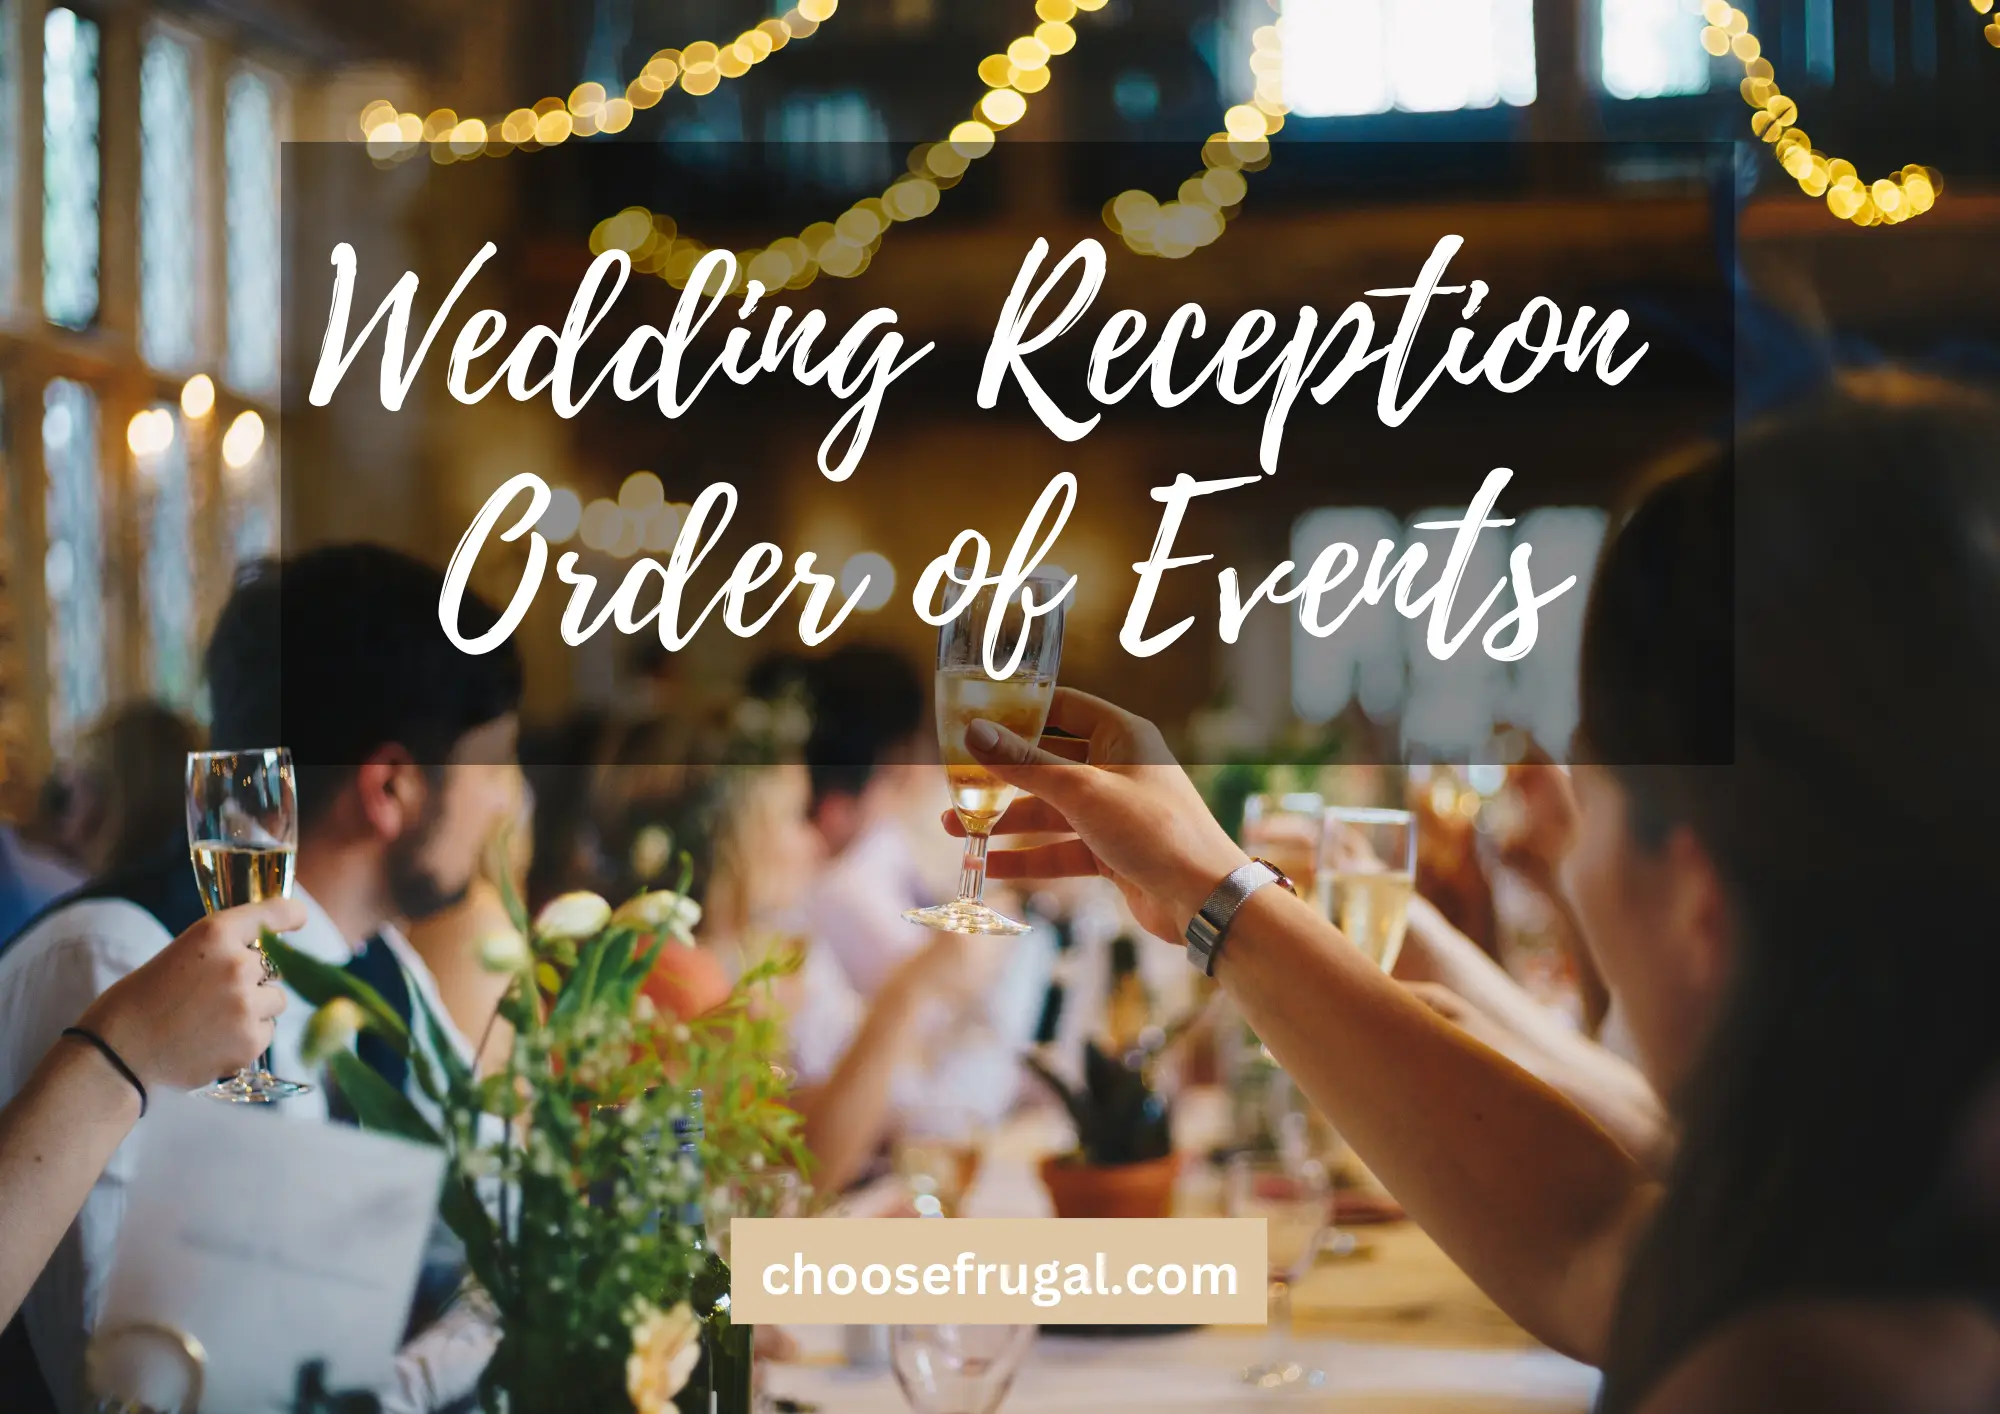 Guest at a wedding toasting. Wedding reception order of events.